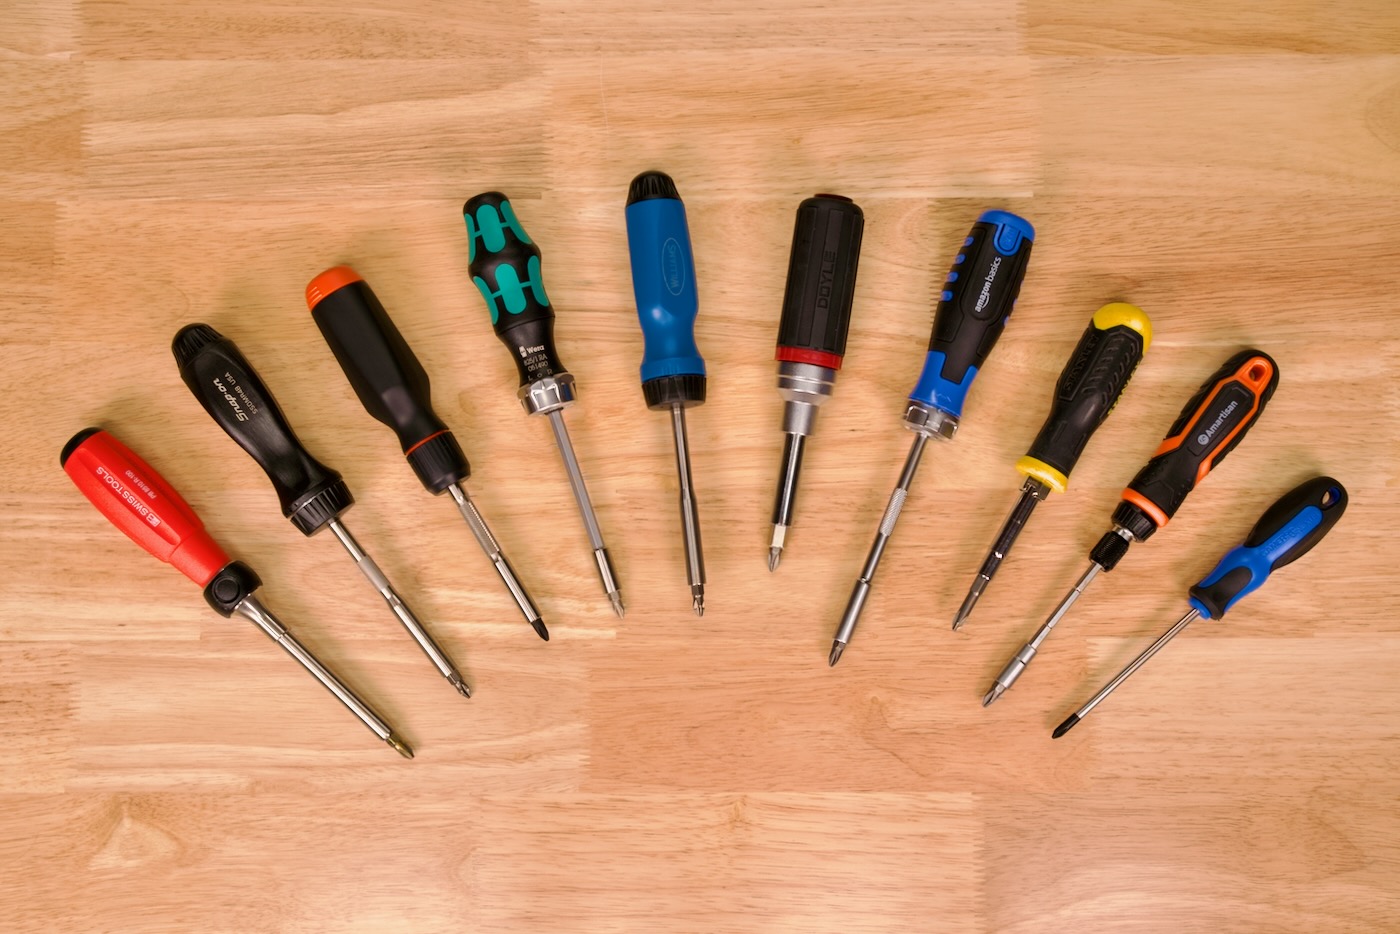 All ratcheting screwdrivers under test laid out on wooden workbench